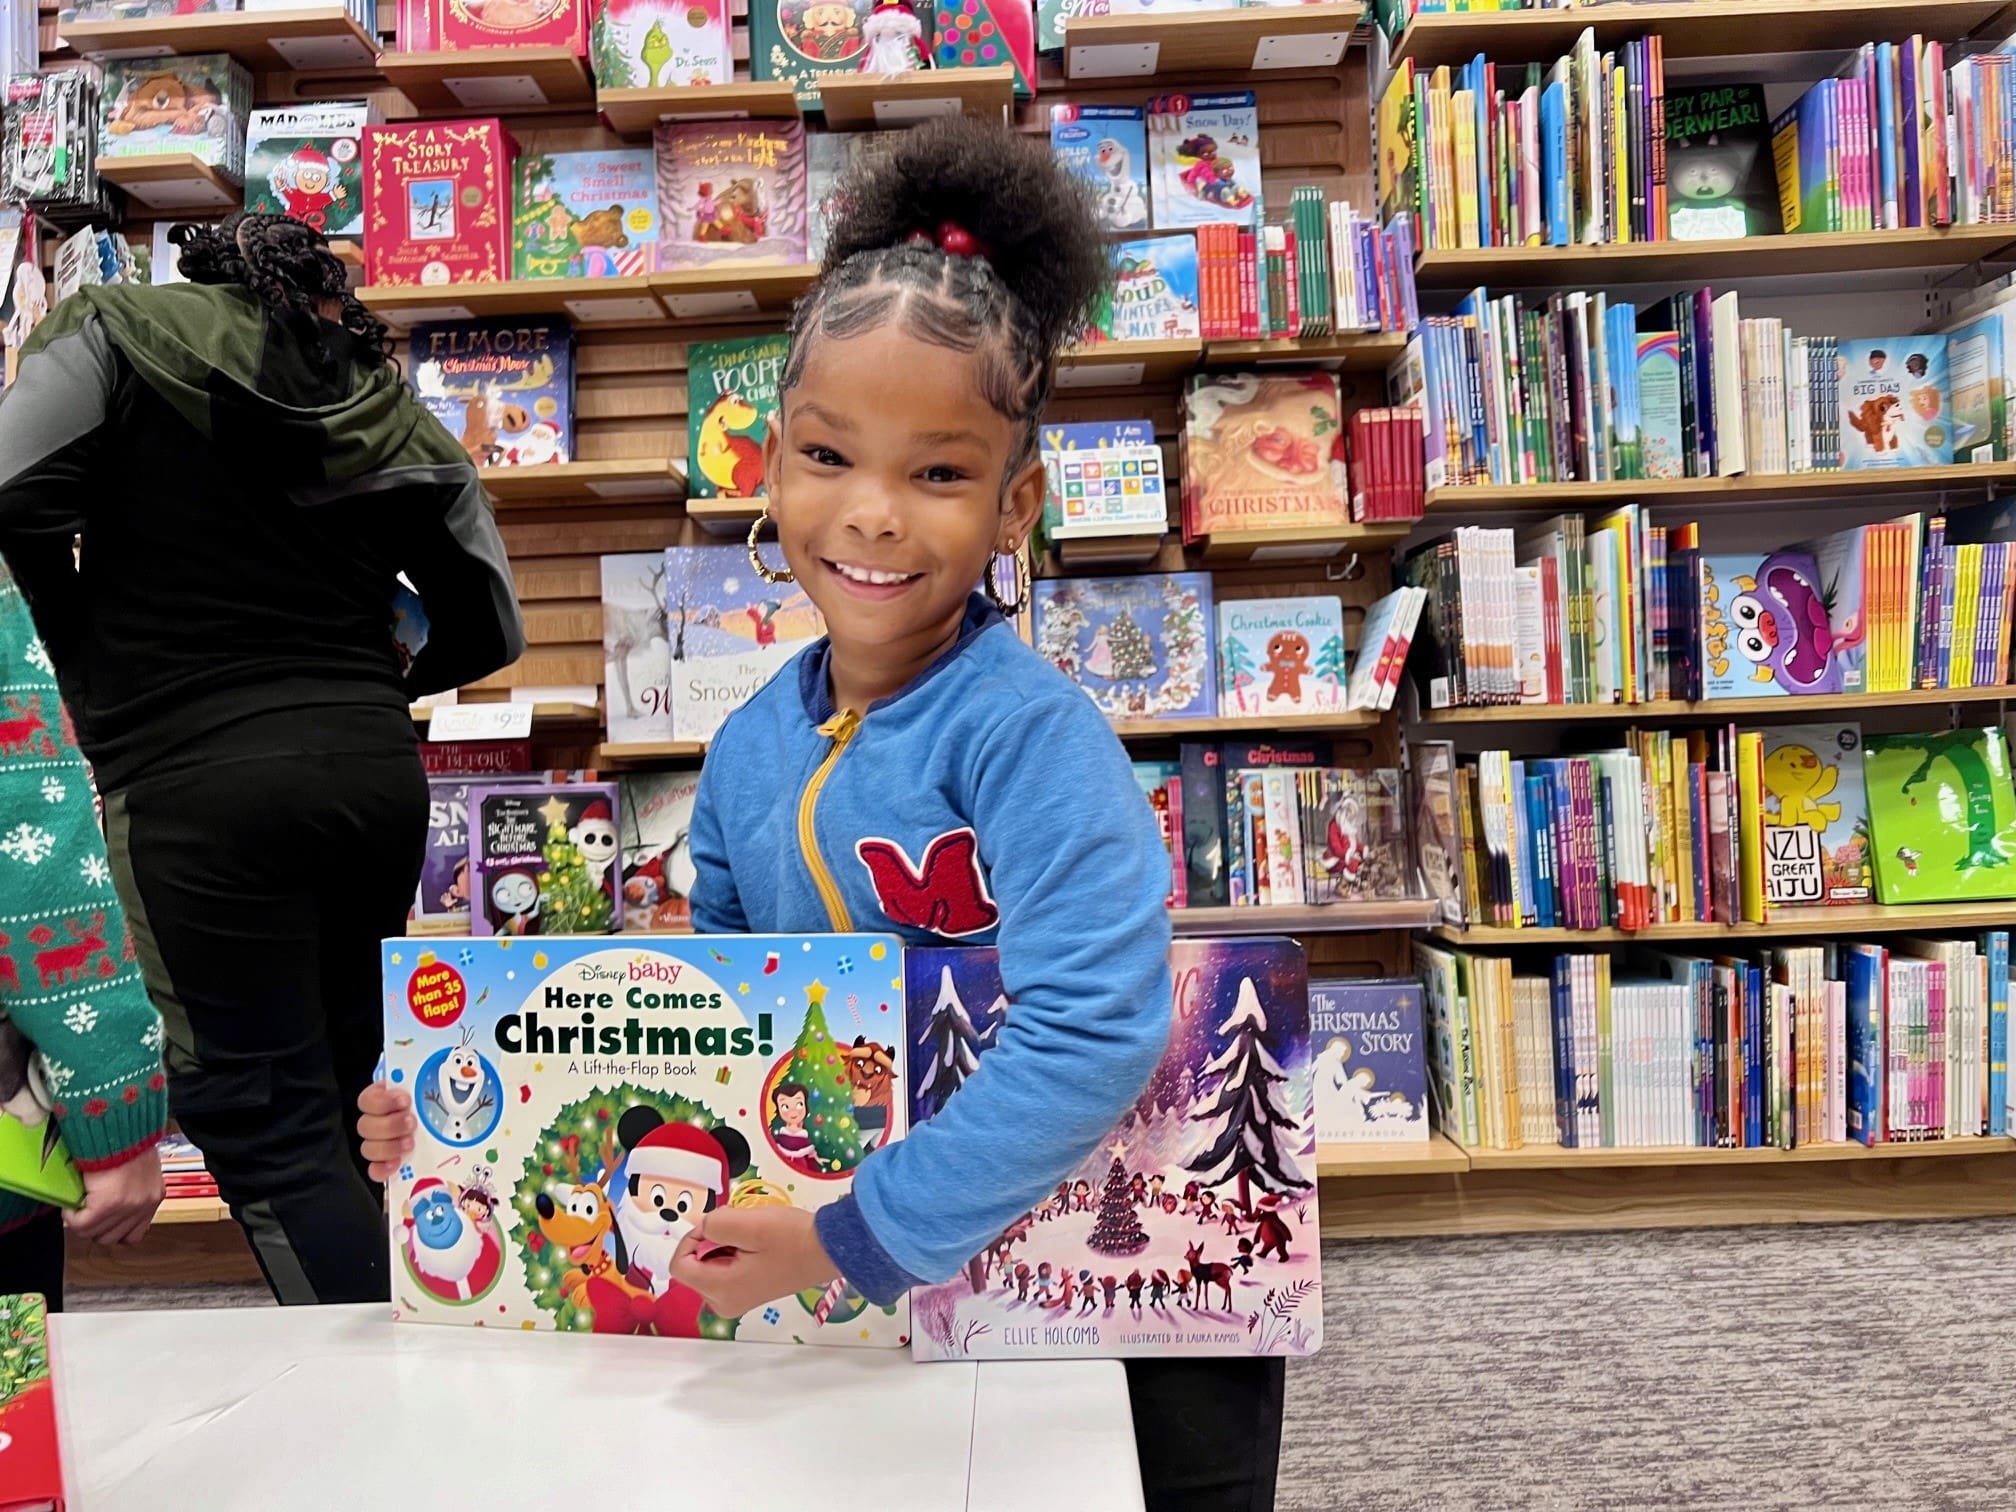 smiling young girl with books at the bookstore we benefit children holiday field trip